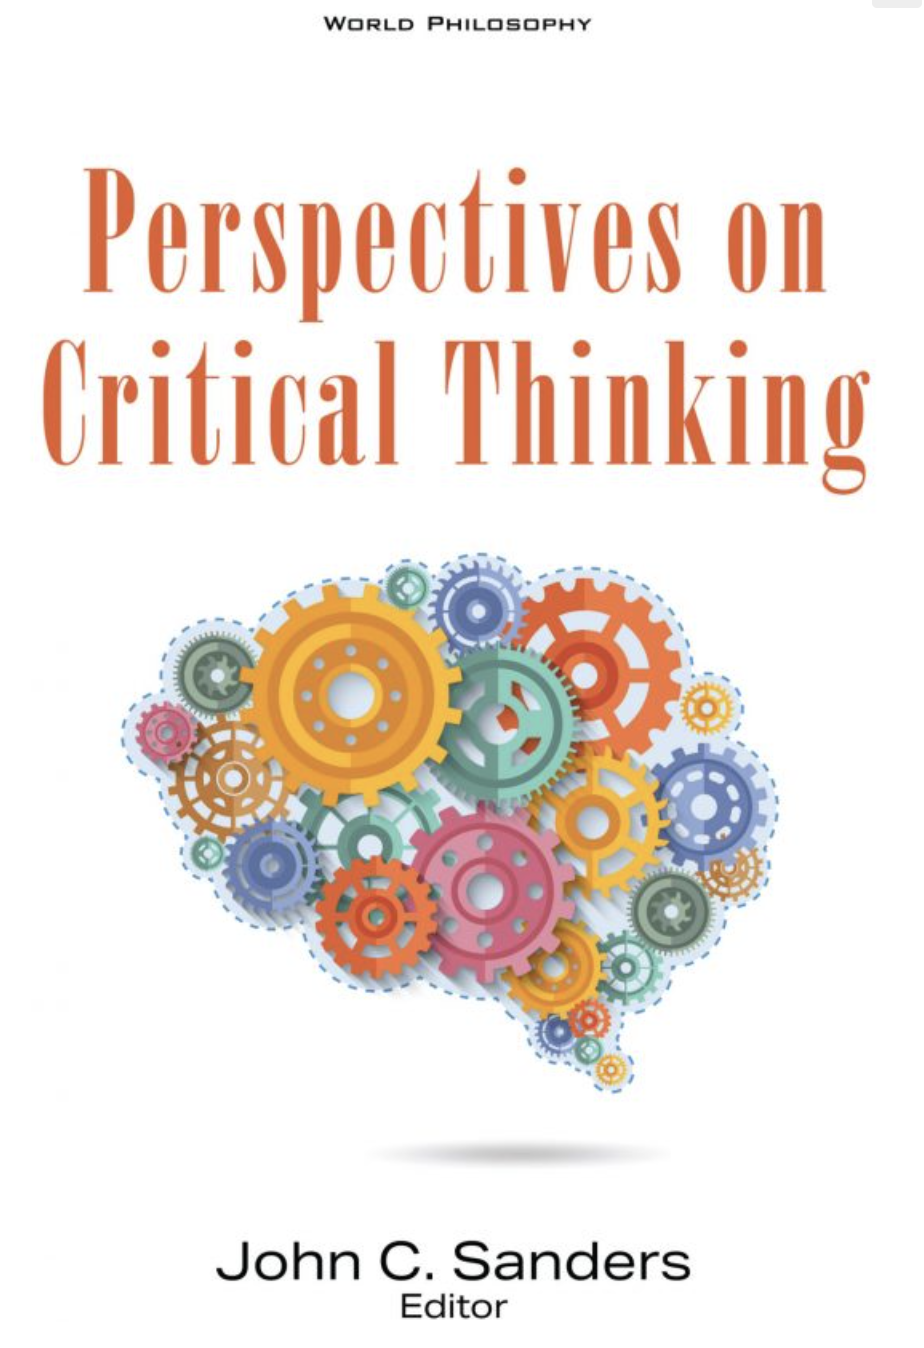 Perspectives on Critical Thinking